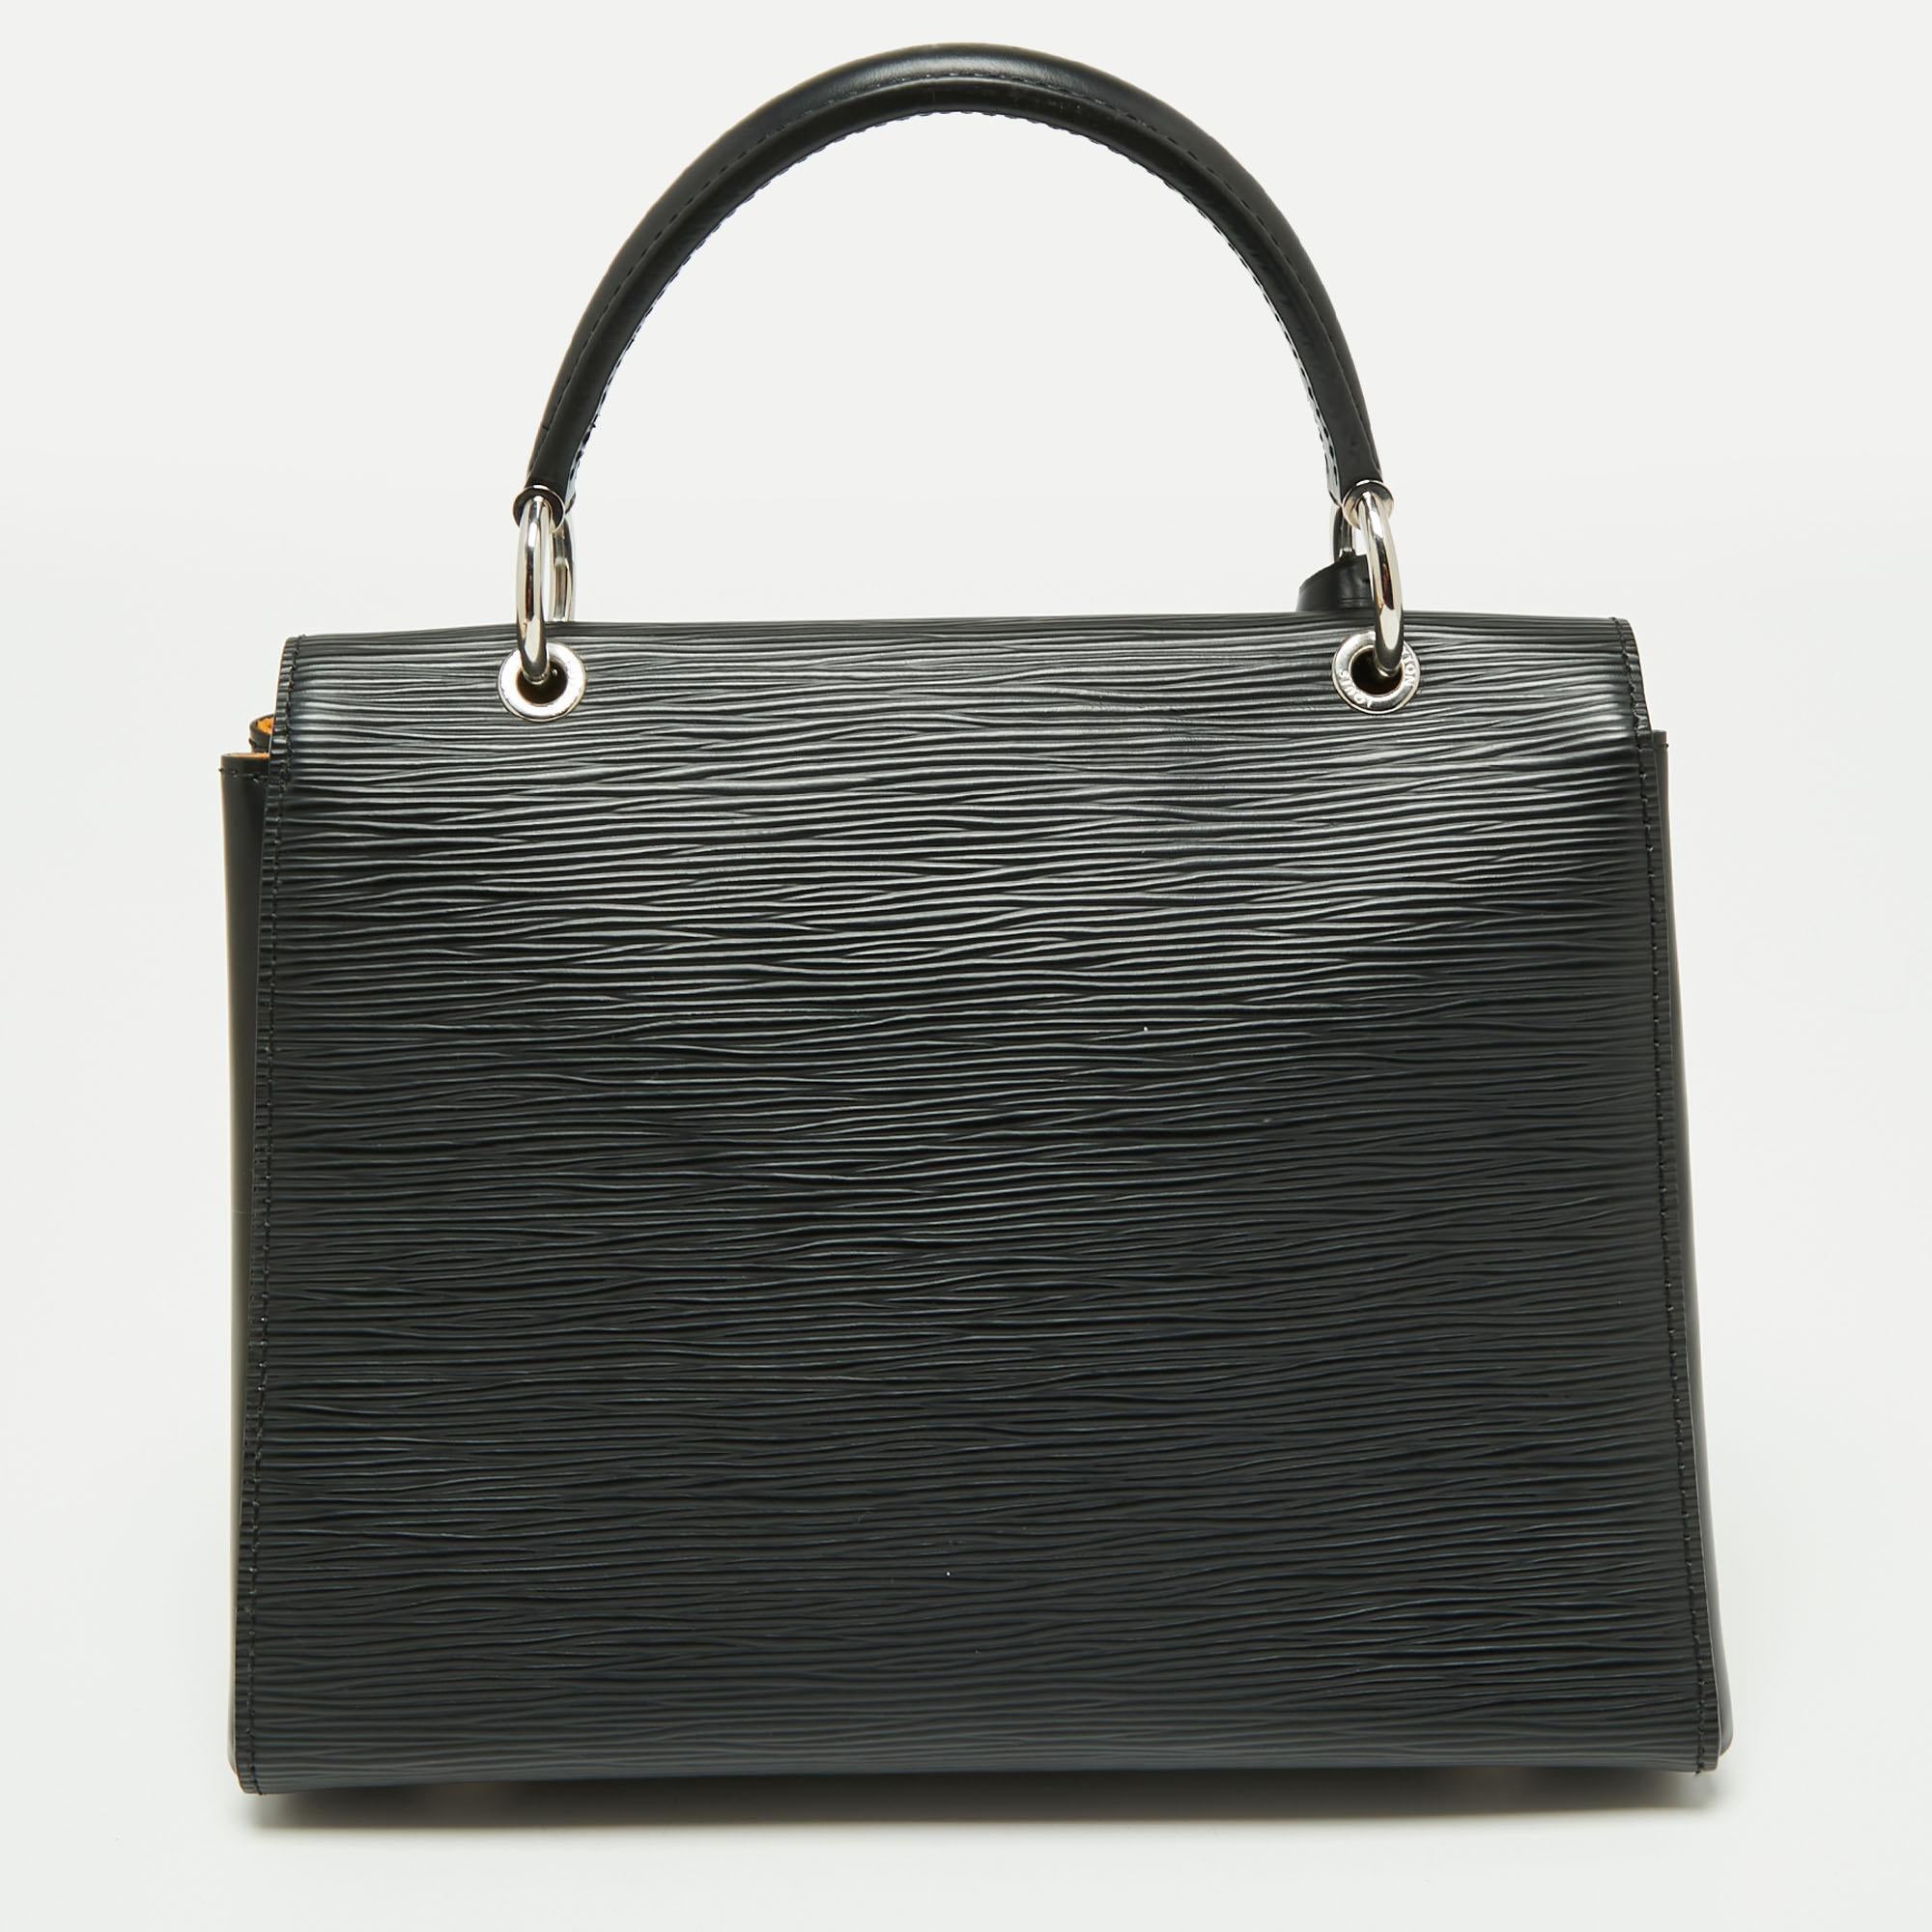 With a perfect balance of chic style and minimalism, this Grenelle bag from the house of Louis Vuitton is an ideal pick for everyday use. It is created using black Epi leather, with a logo accent placed on the front. It features a top handle,